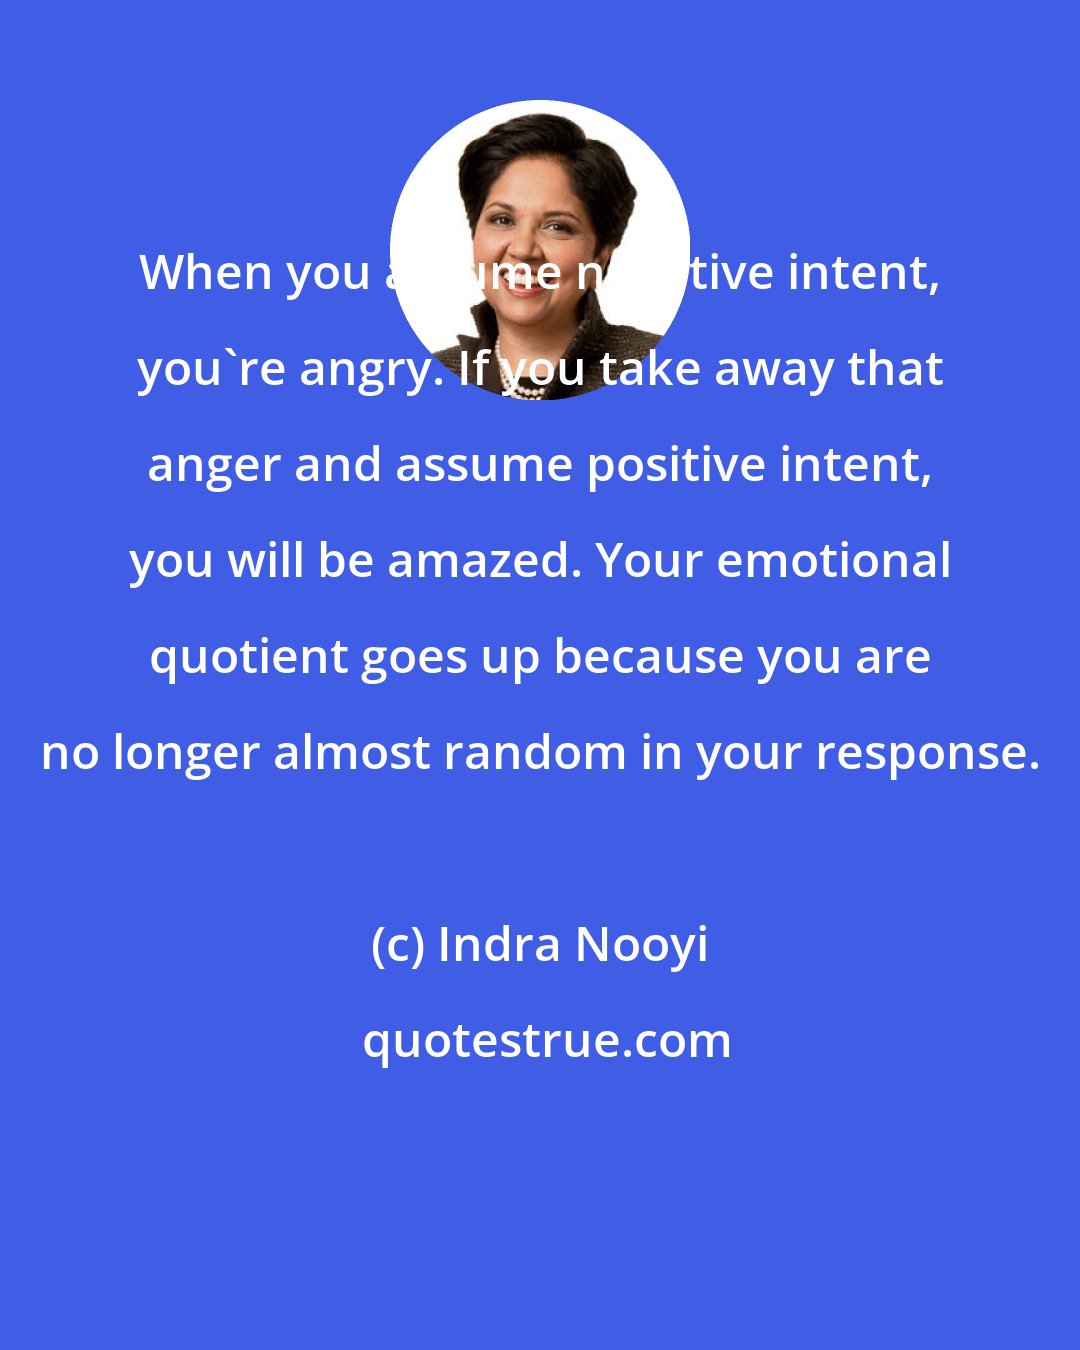 Indra Nooyi: When you assume negative intent, you're angry. If you take away that anger and assume positive intent, you will be amazed. Your emotional quotient goes up because you are no longer almost random in your response.